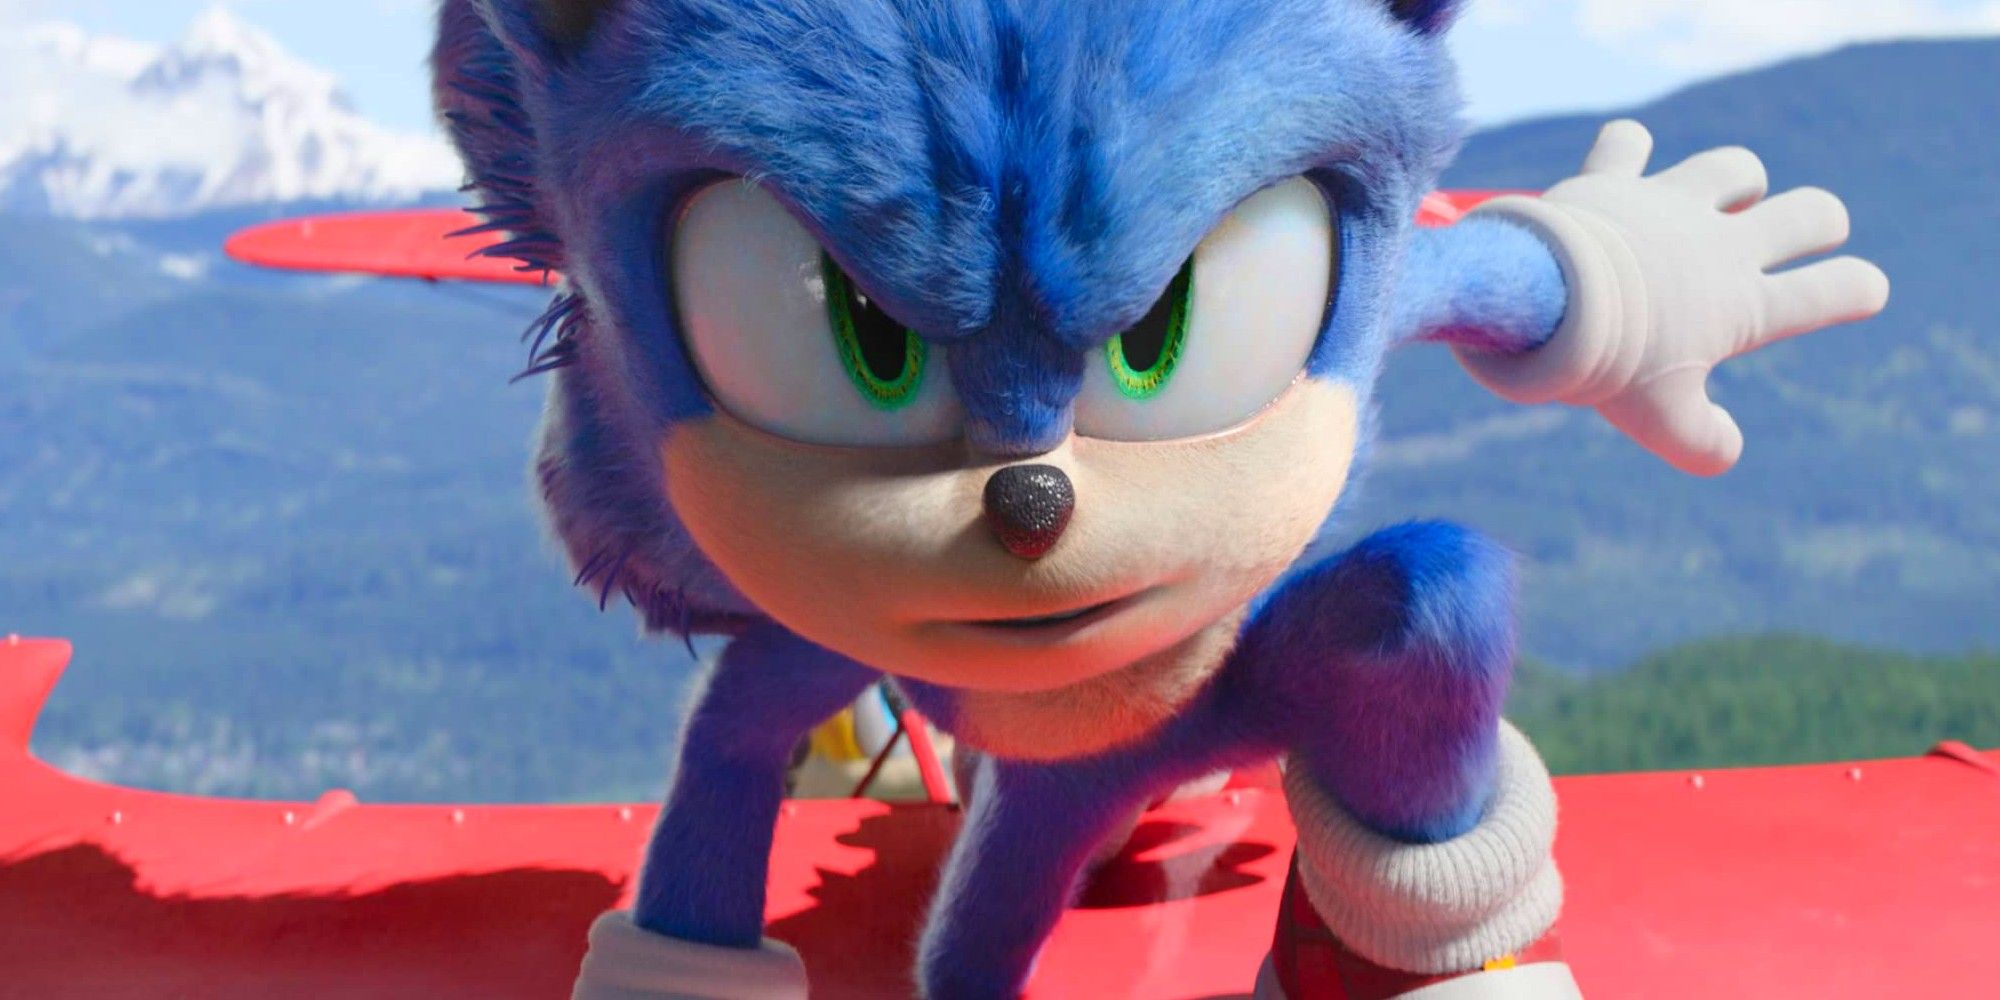 Sonic the Hedgehog 2 Is The Highest-Grossing Video Game Movie In US